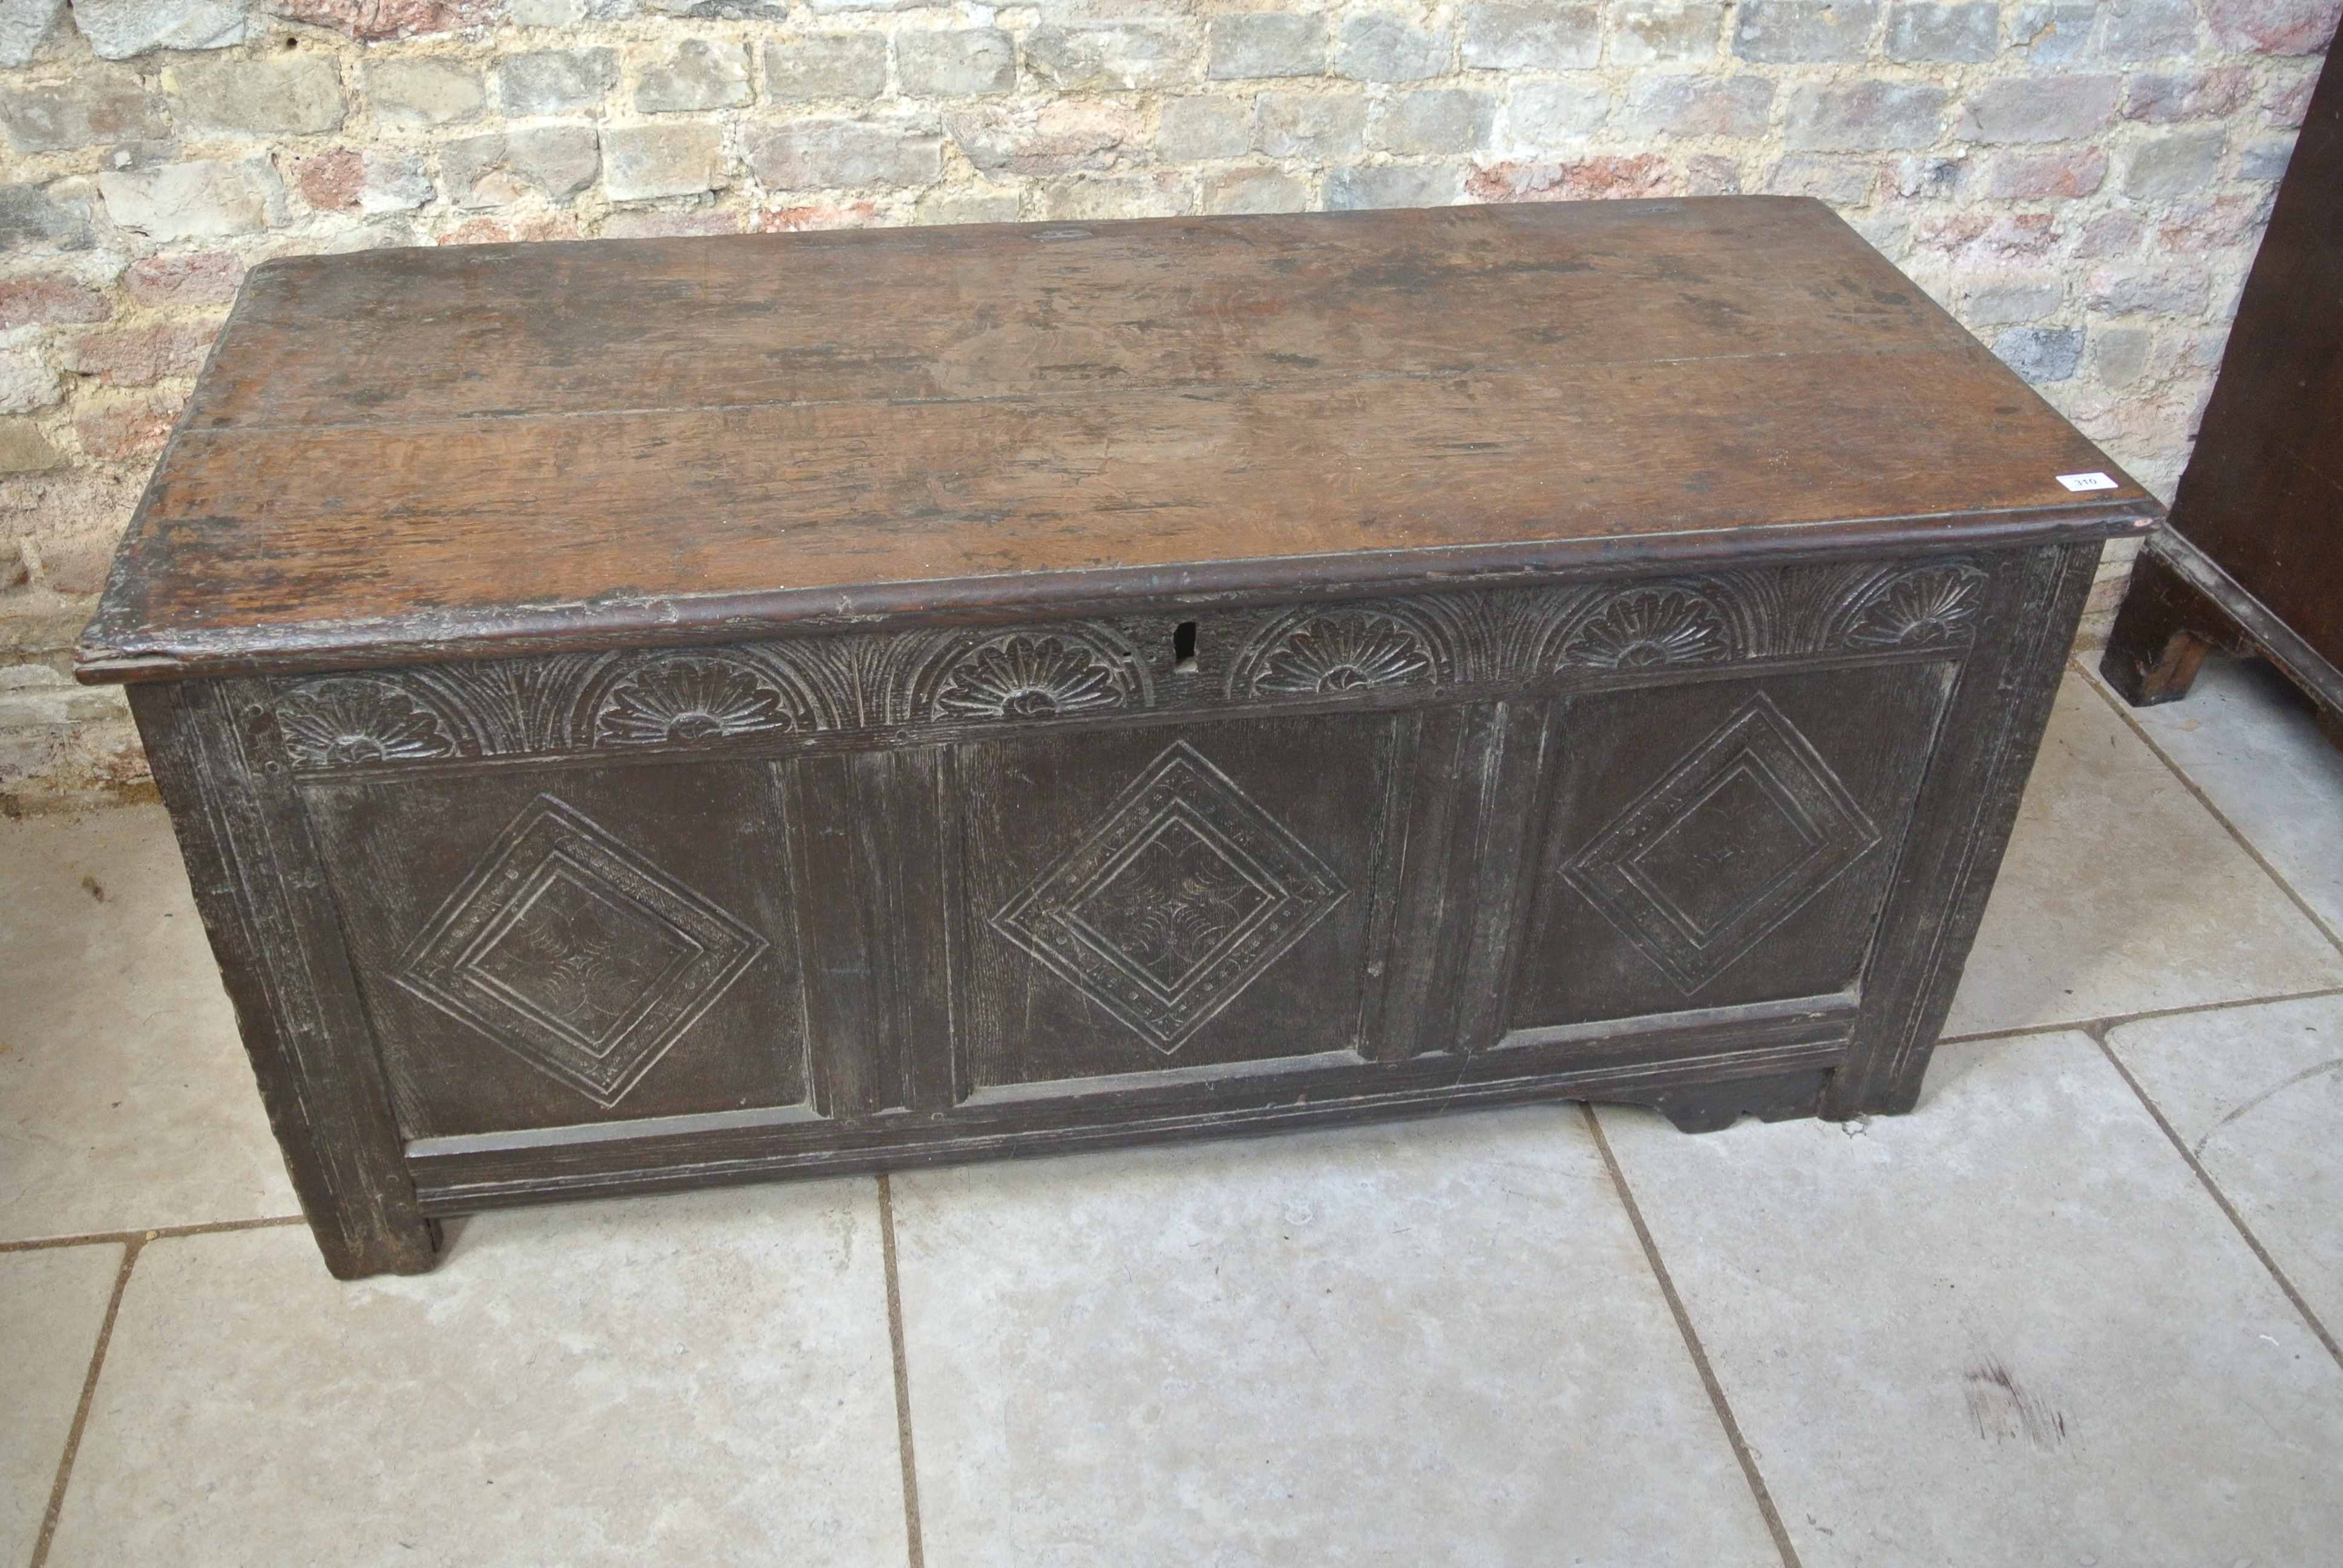 An 18th Century oak coffer with a carved front - 64cm tall x 138cm wide - some wear mainly to the